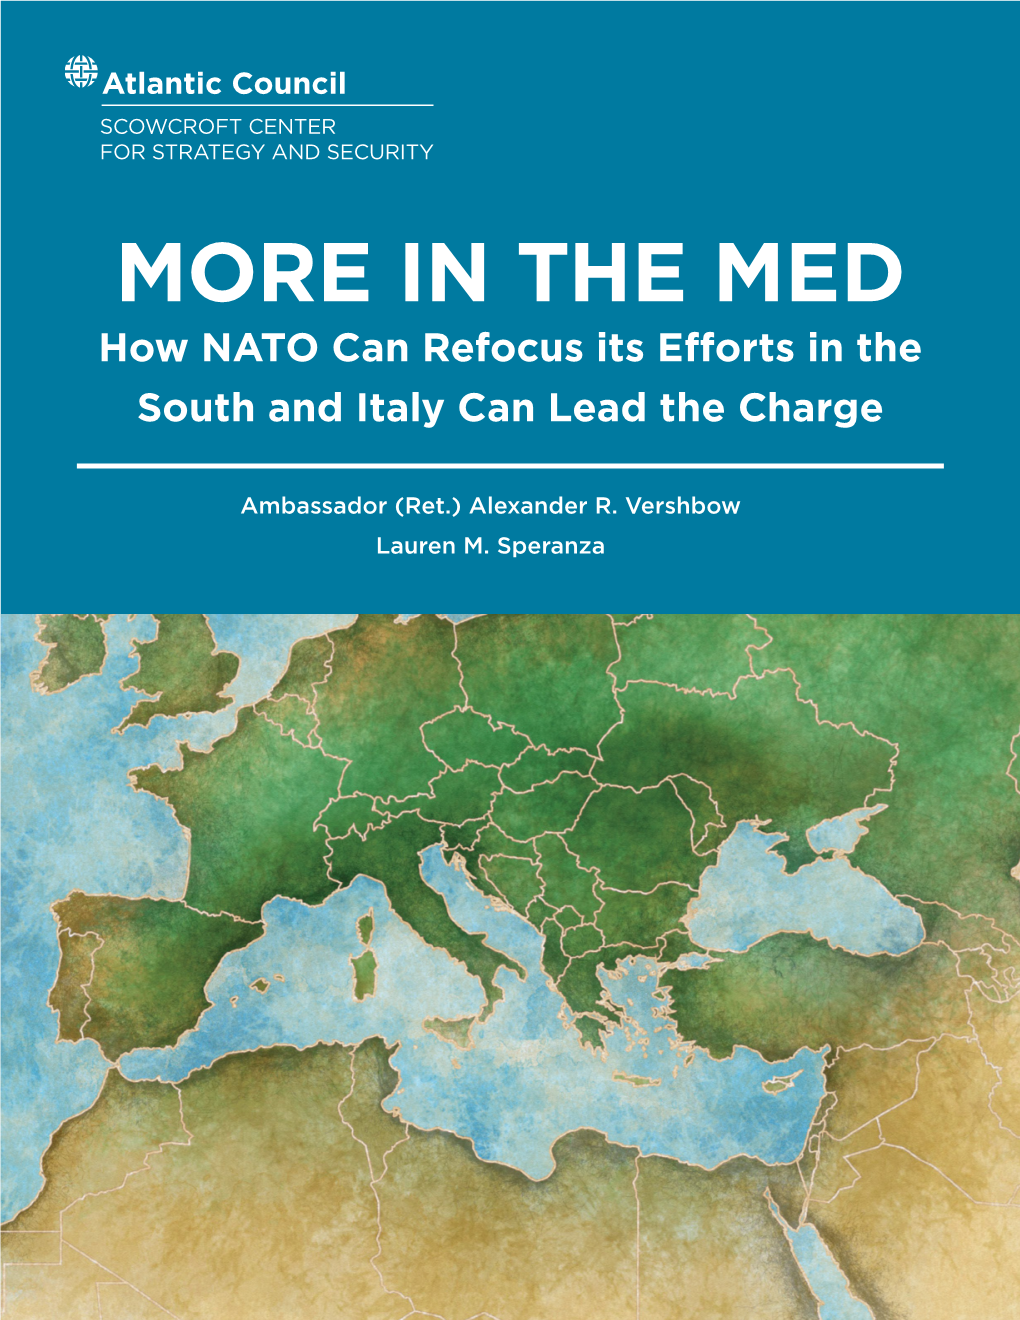 IN the MED How NATO Can Refocus Its Efforts in the South and Italy Can Lead the Charge